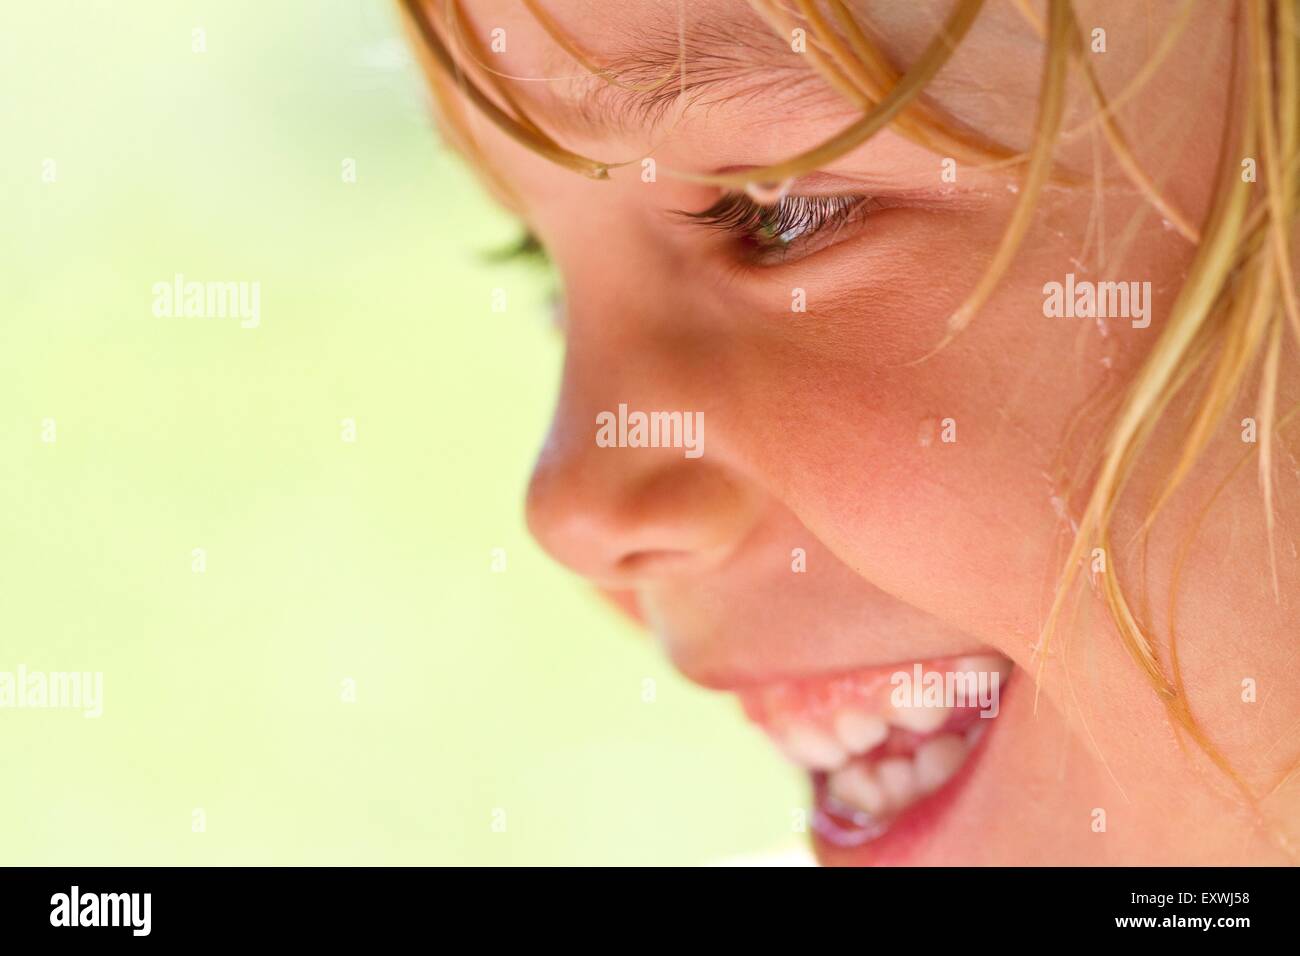 Girl with wet hair Stock Photo